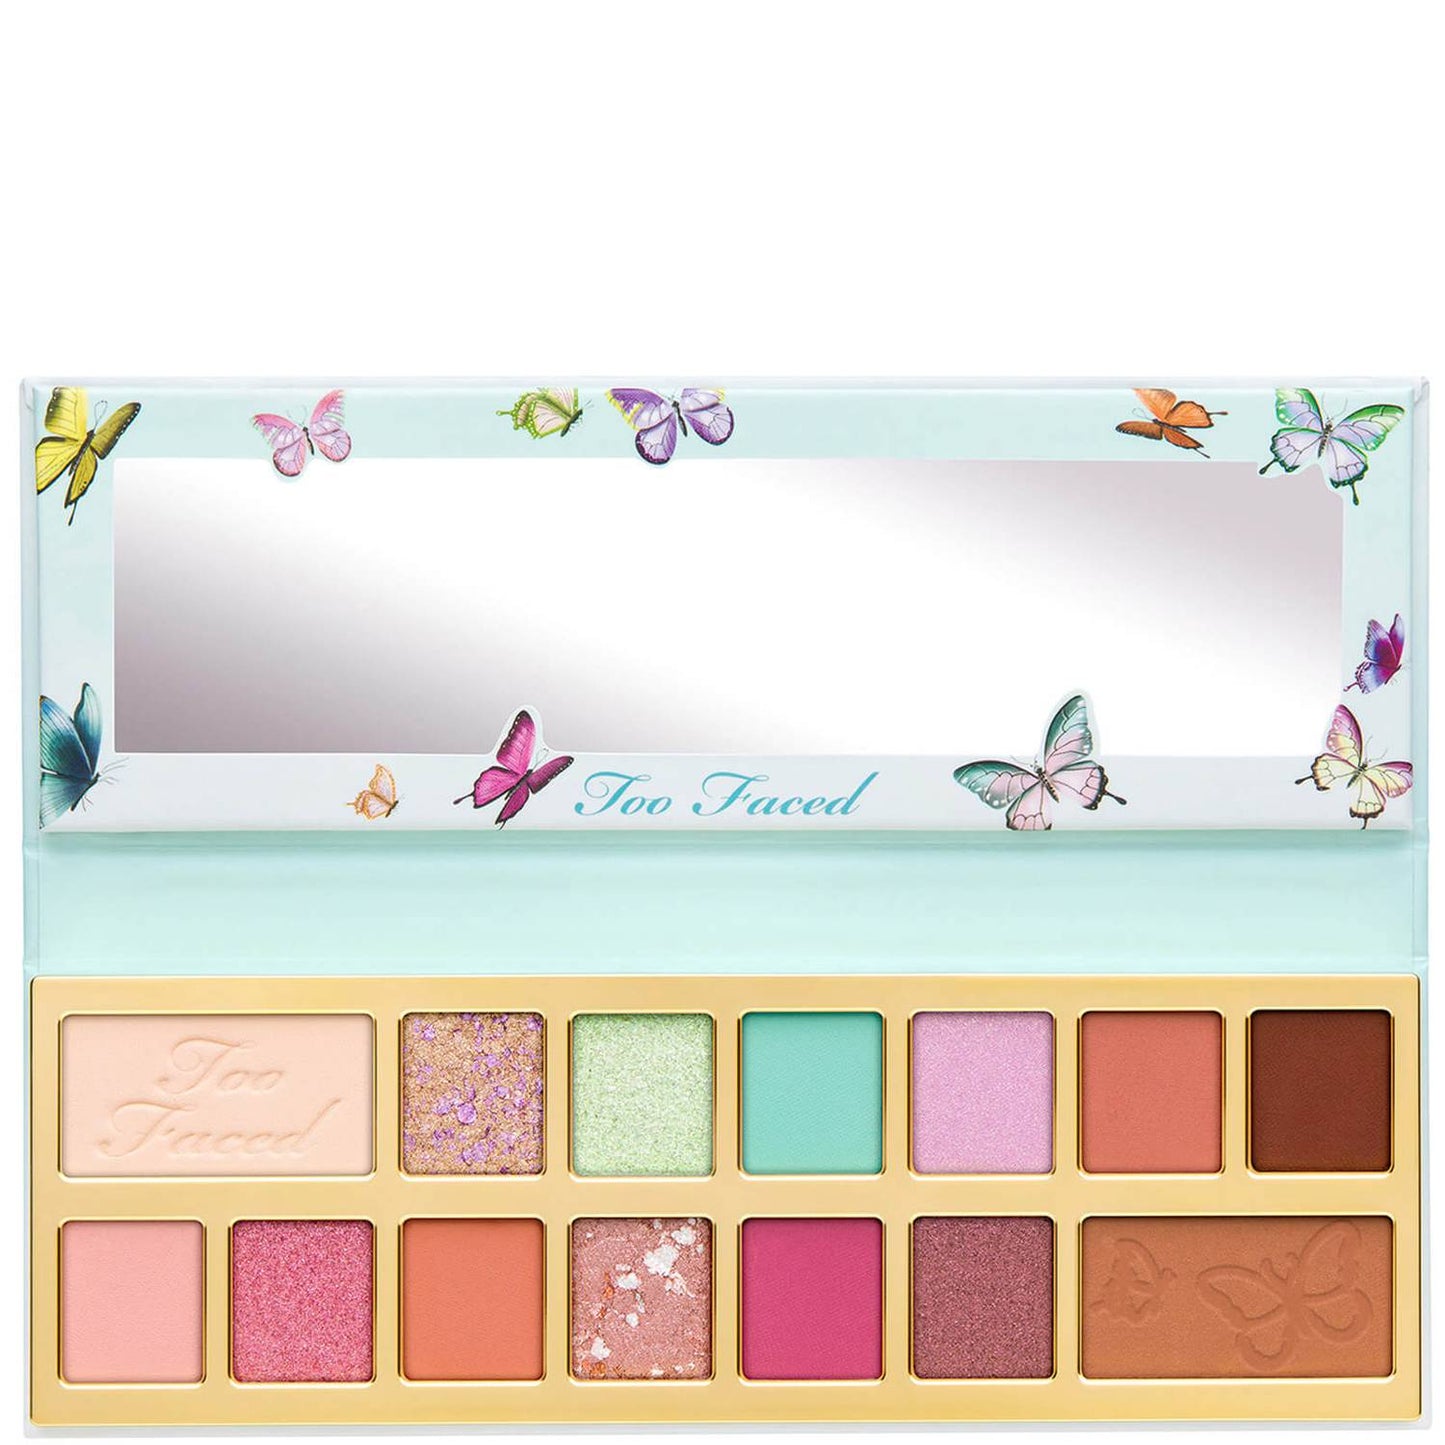 Too Faced Too Femme Eye Shadow Palette